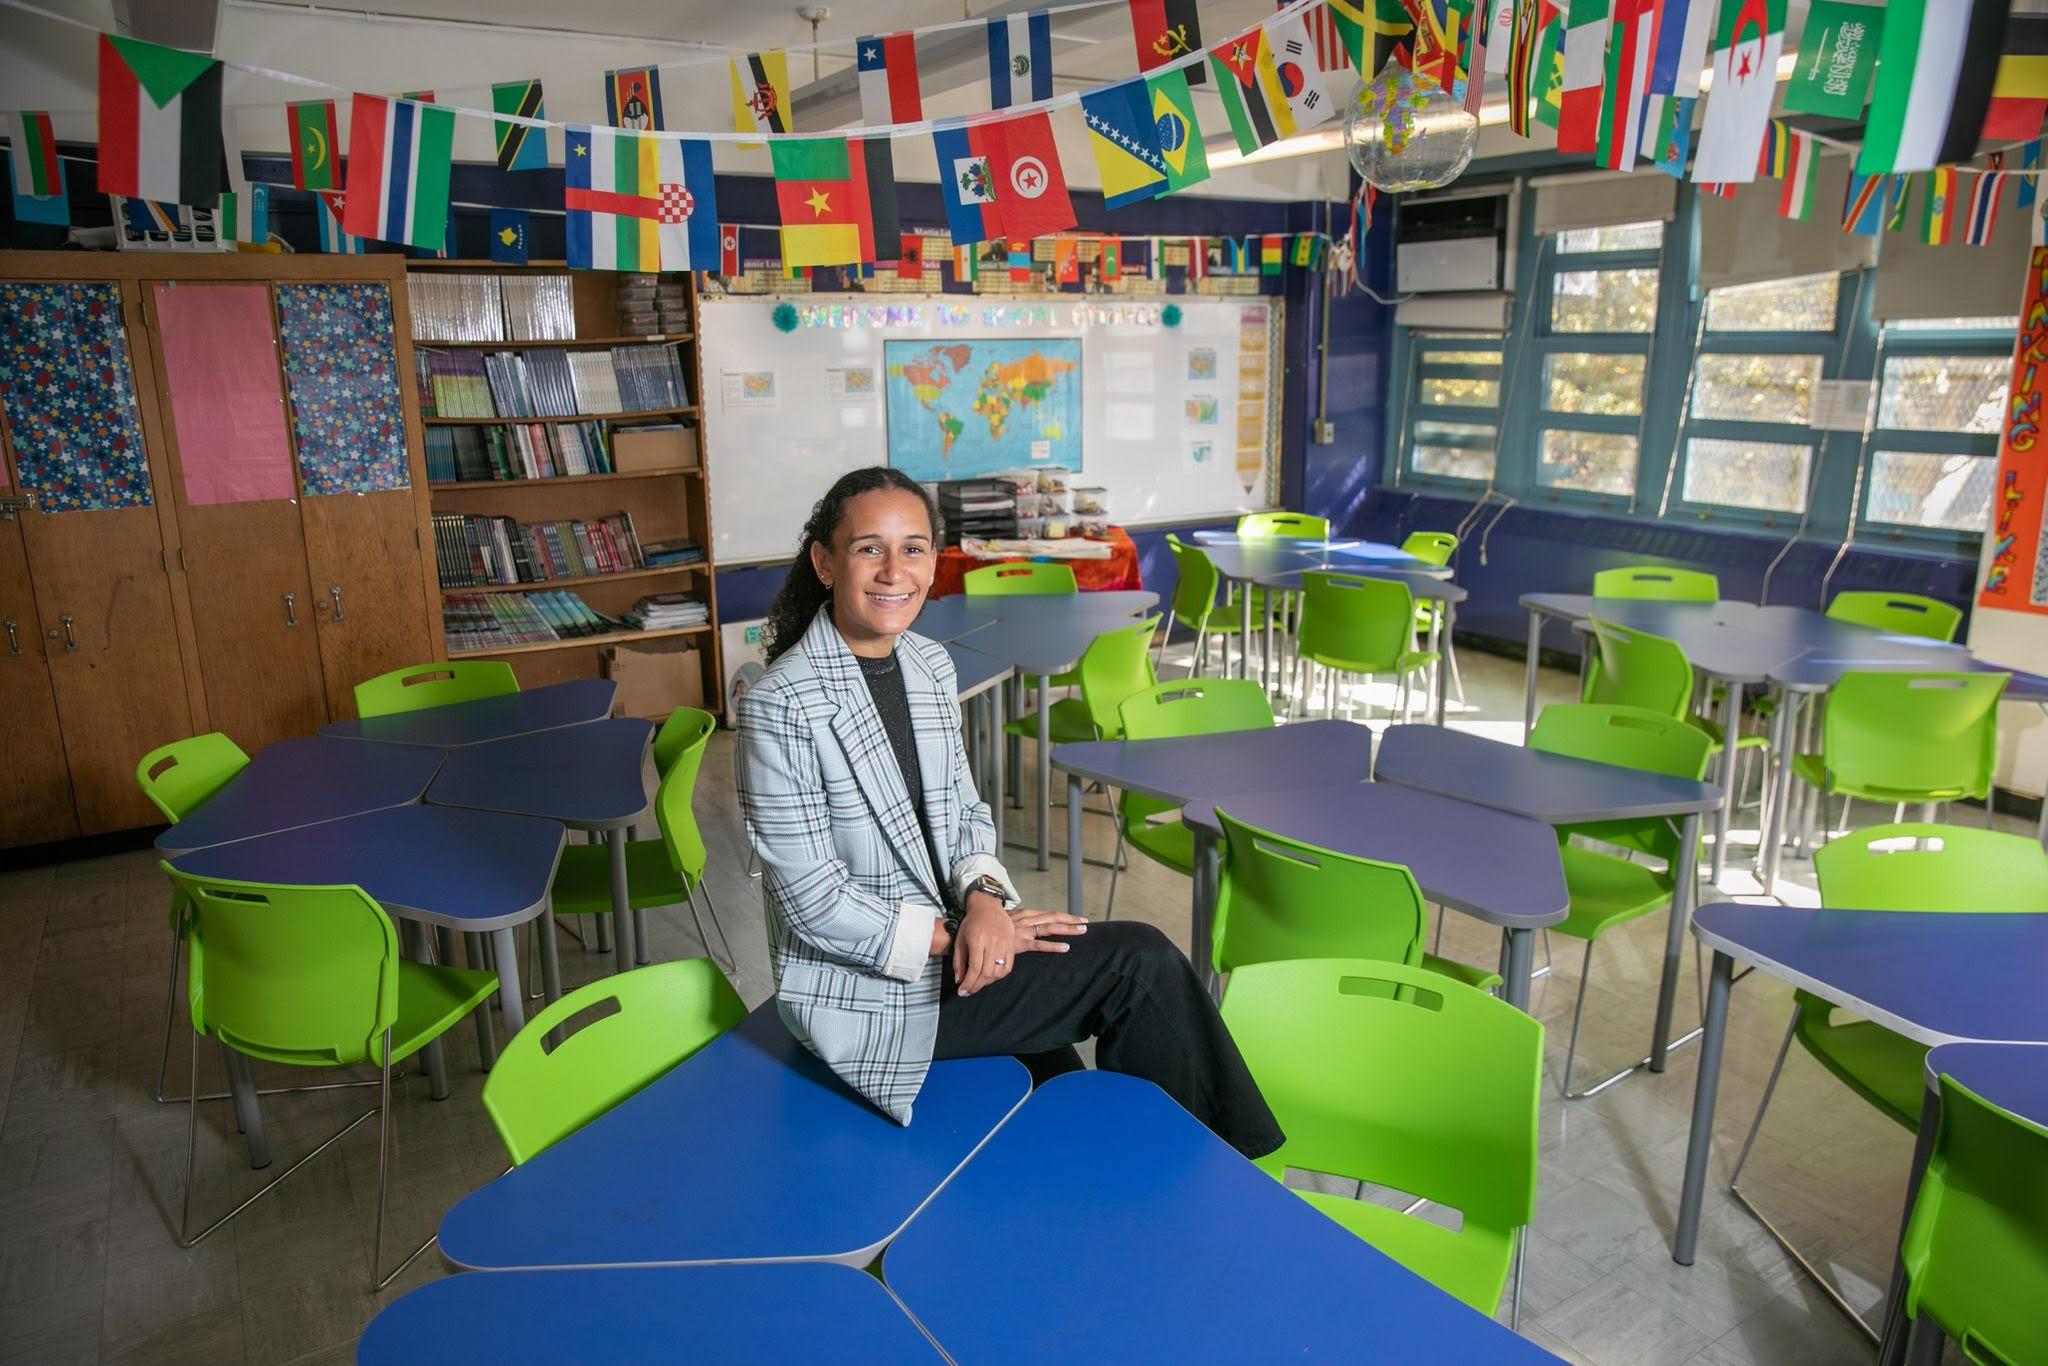 Shani smiling in her middle school classroom